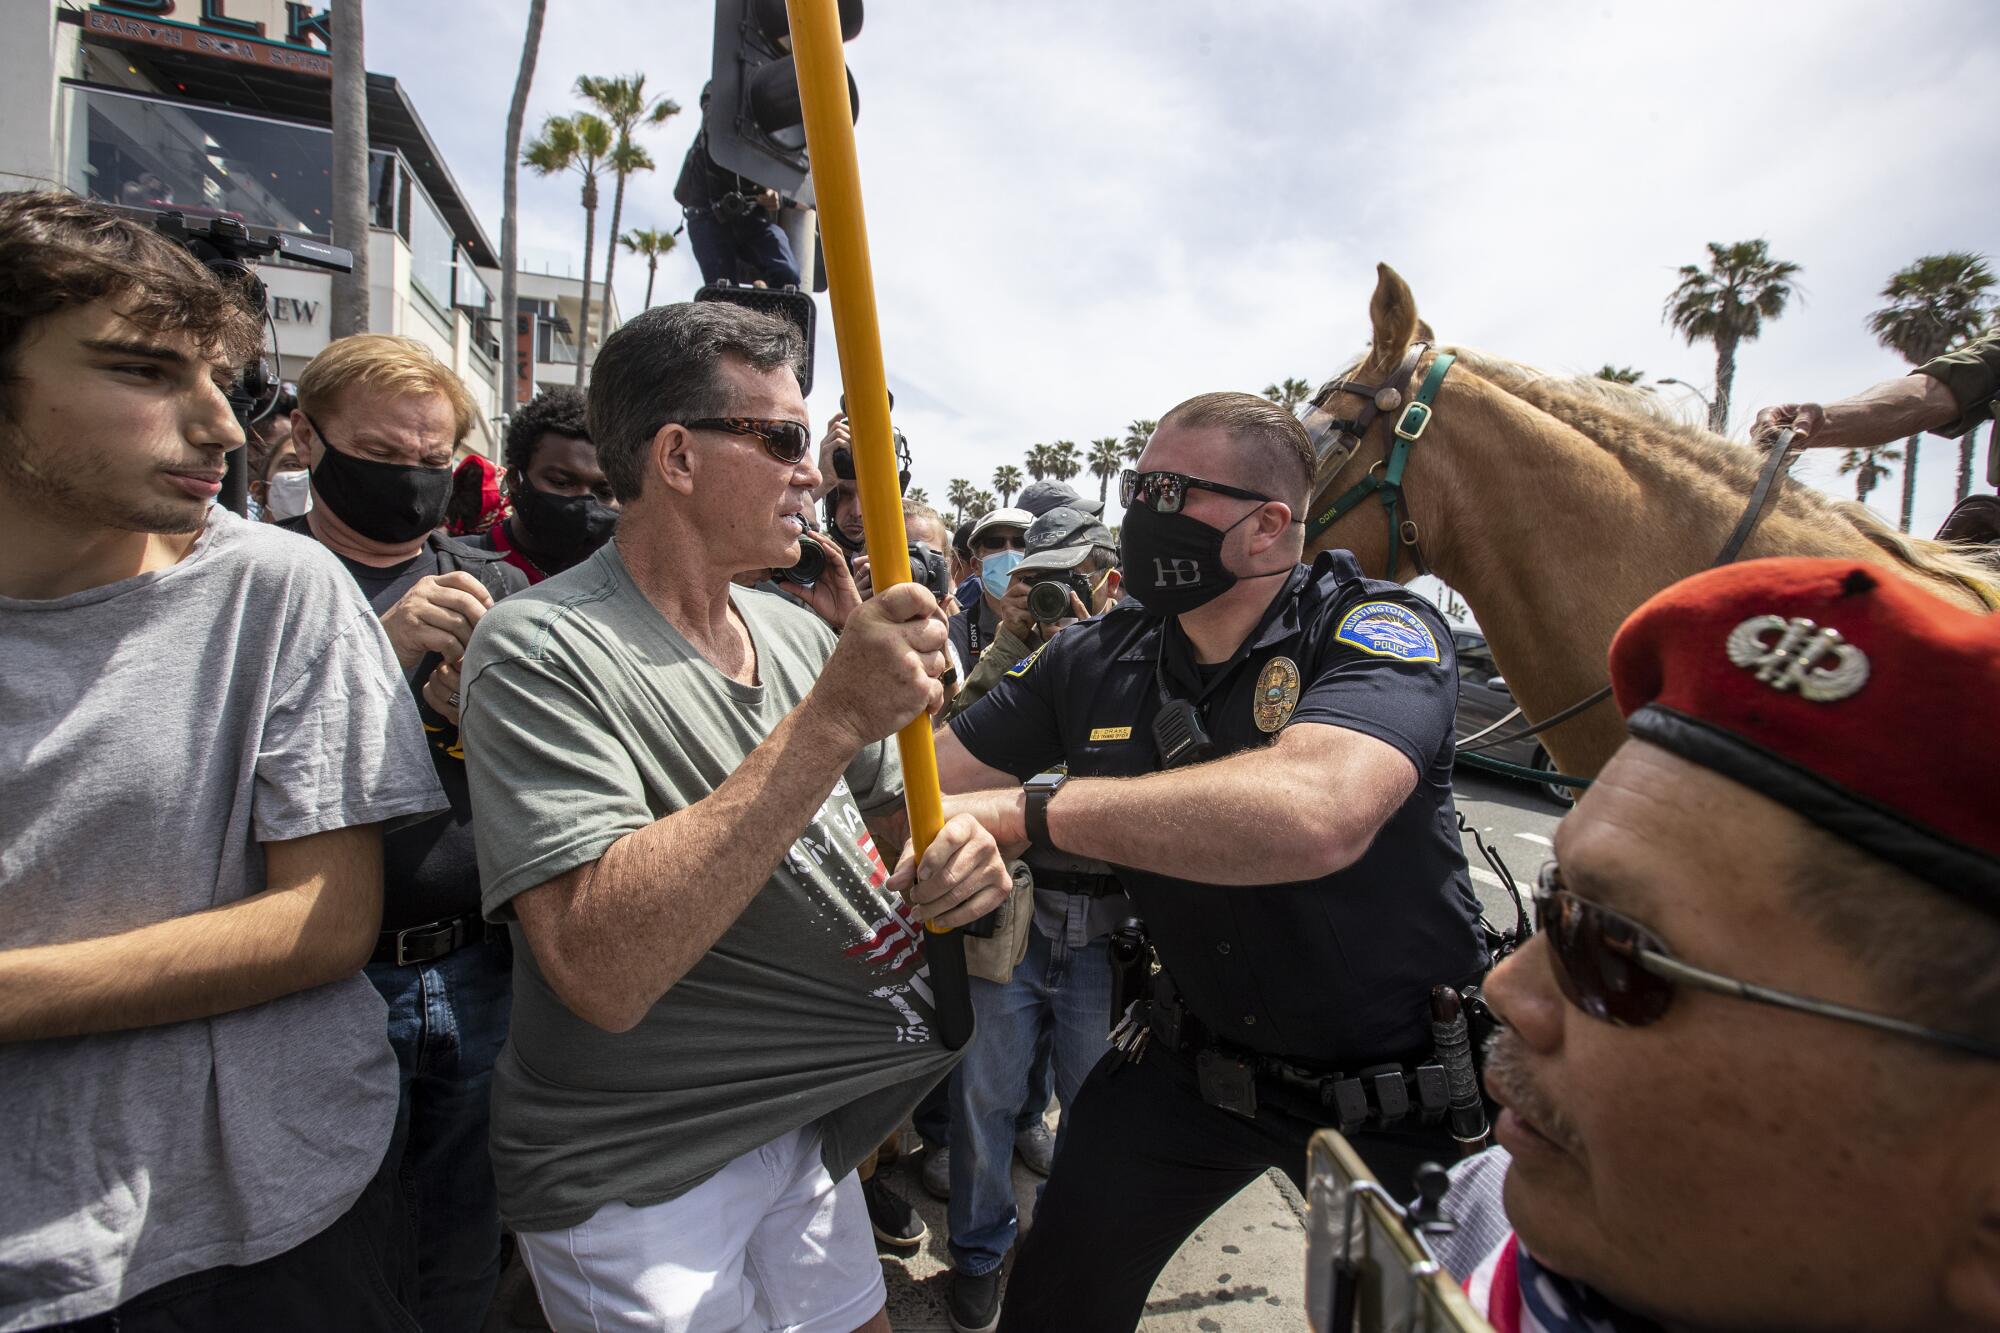 A police officer arrests a man holding a flag amid a crowd